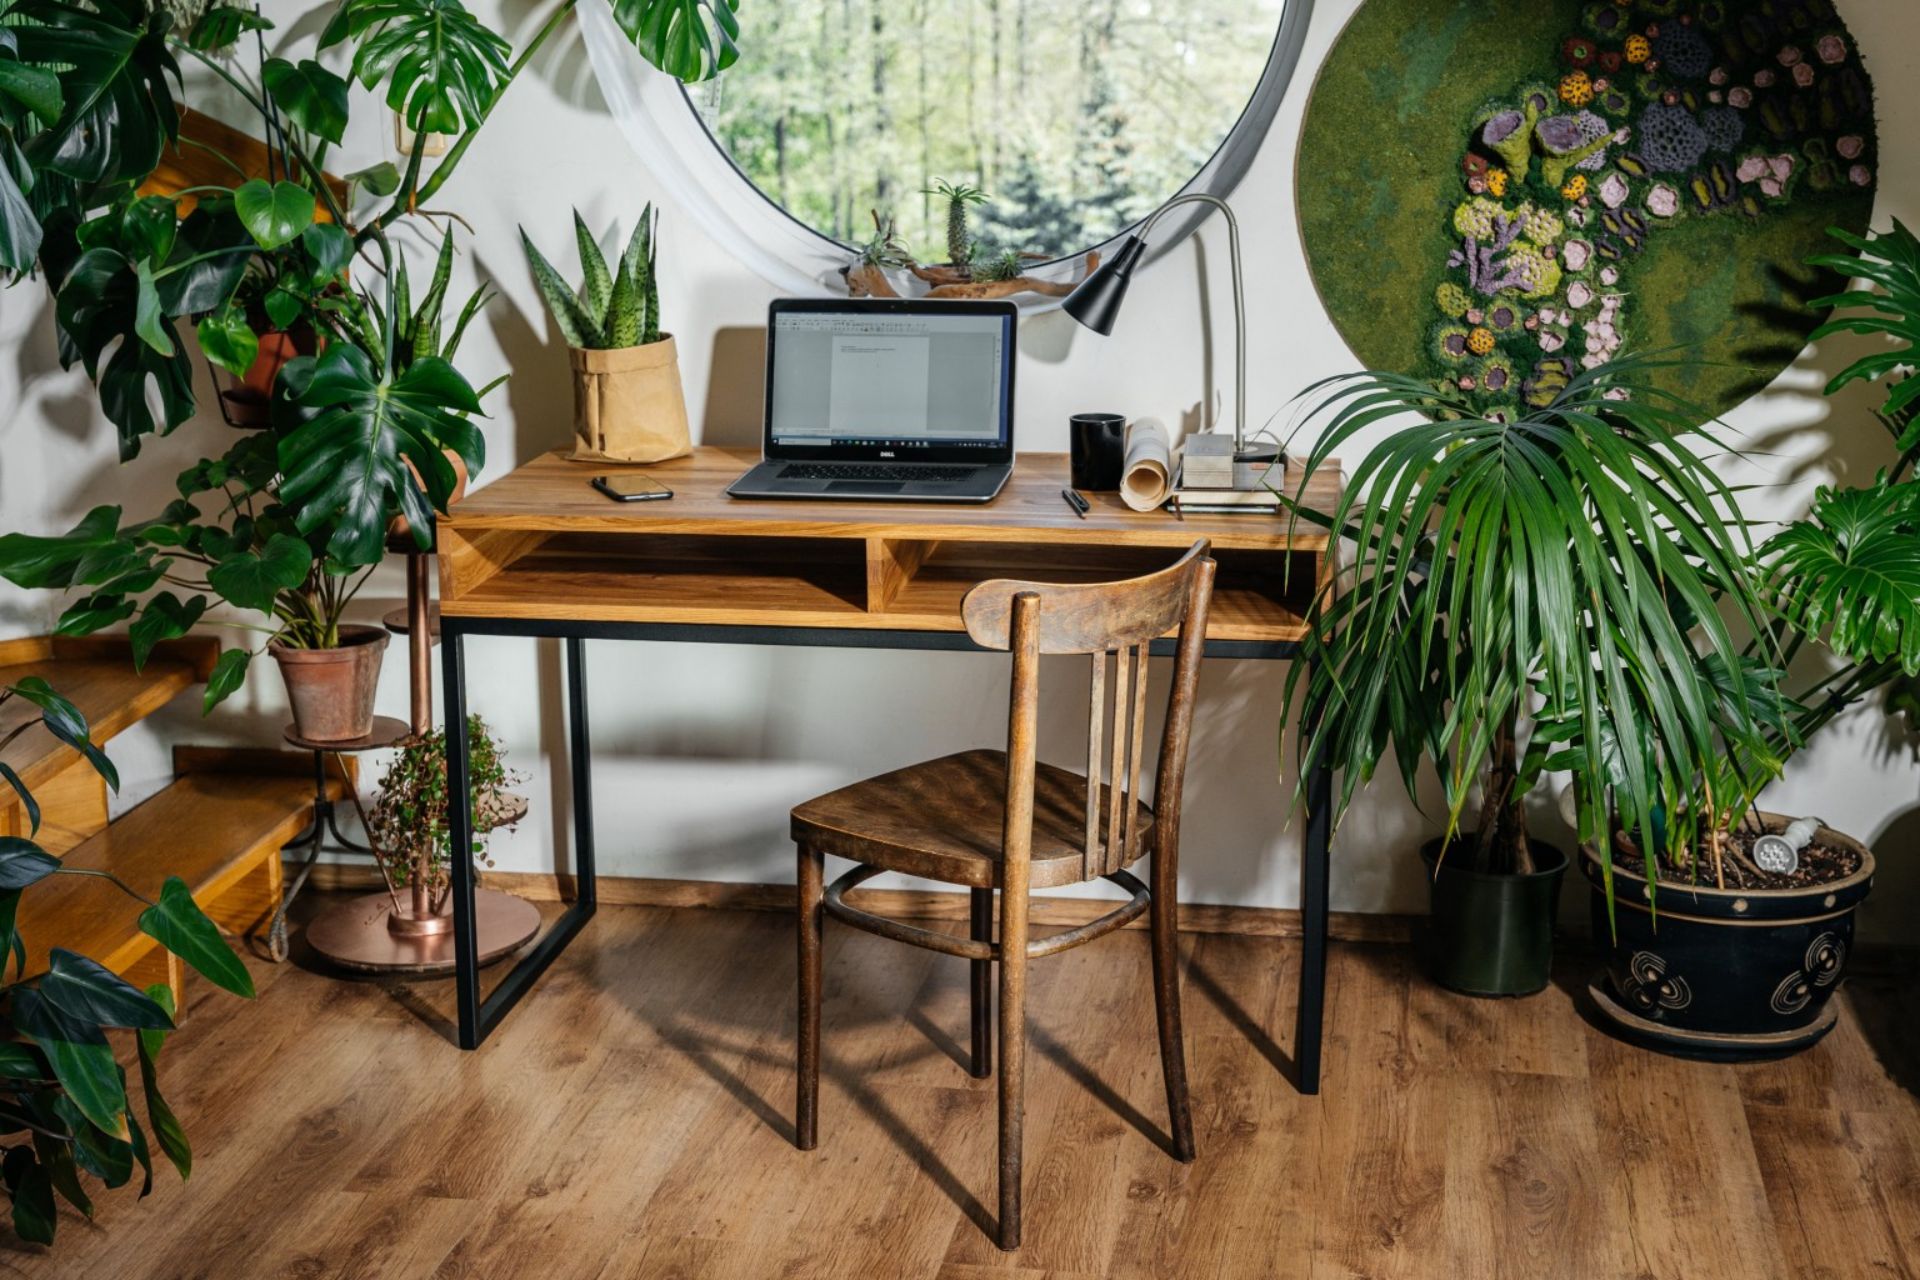 The BLÄCK LIGHT desk made of solid oak wood – Urban jungle style home office